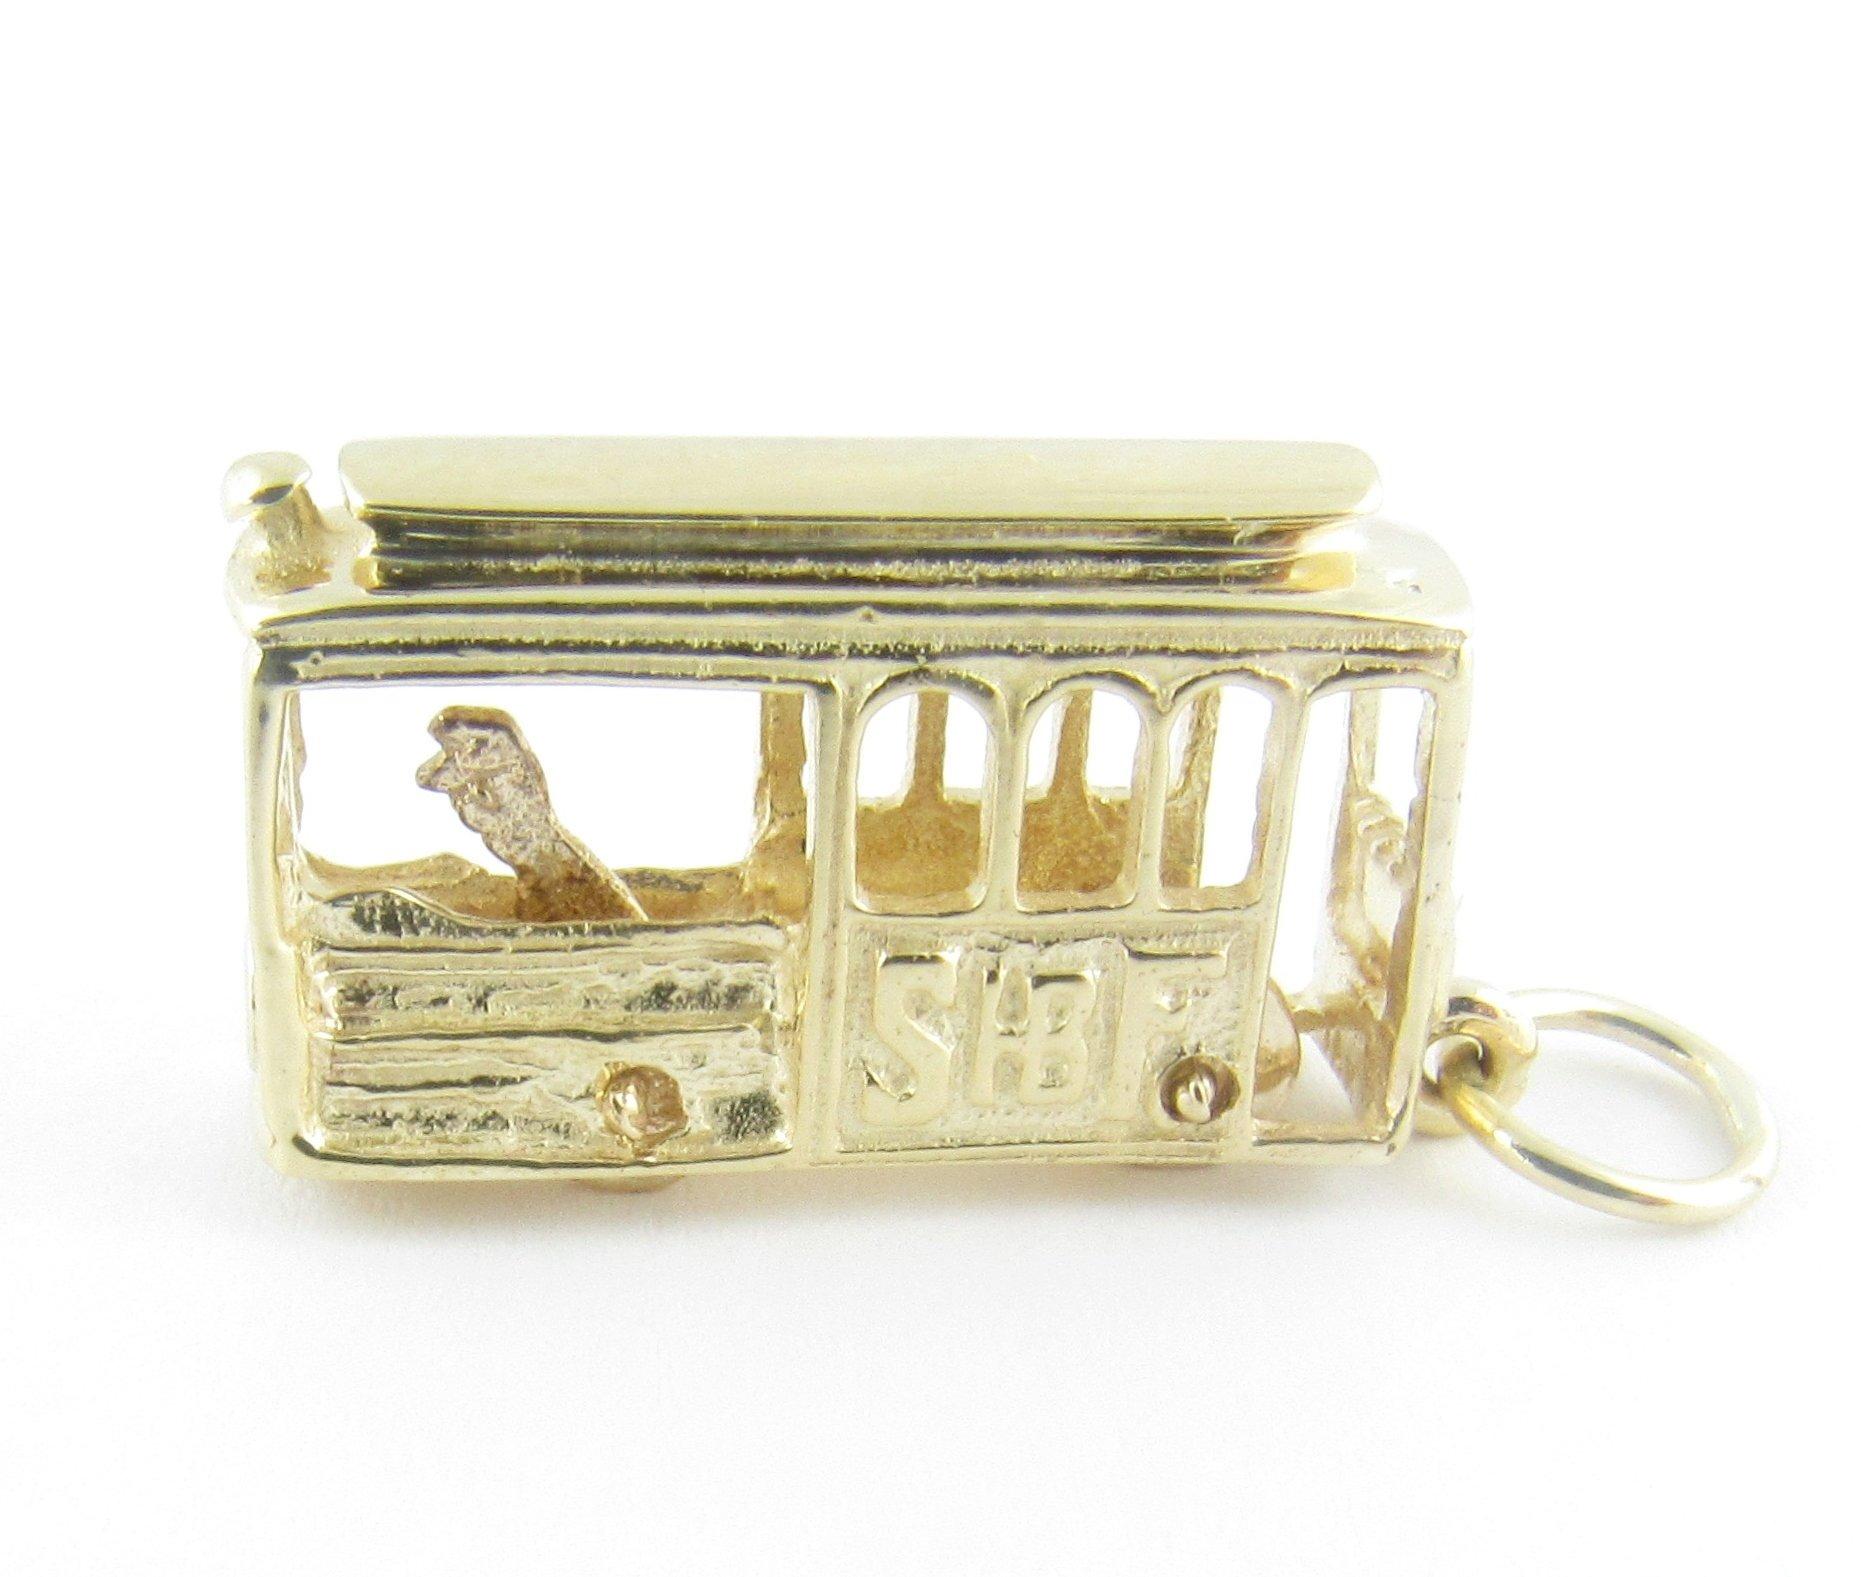 Vintage 14 Karat Yellow Gold San Francisco Cable Car Charm

Jomp on the trolley!

This whimsical charm features a miniatures cable car with the words 